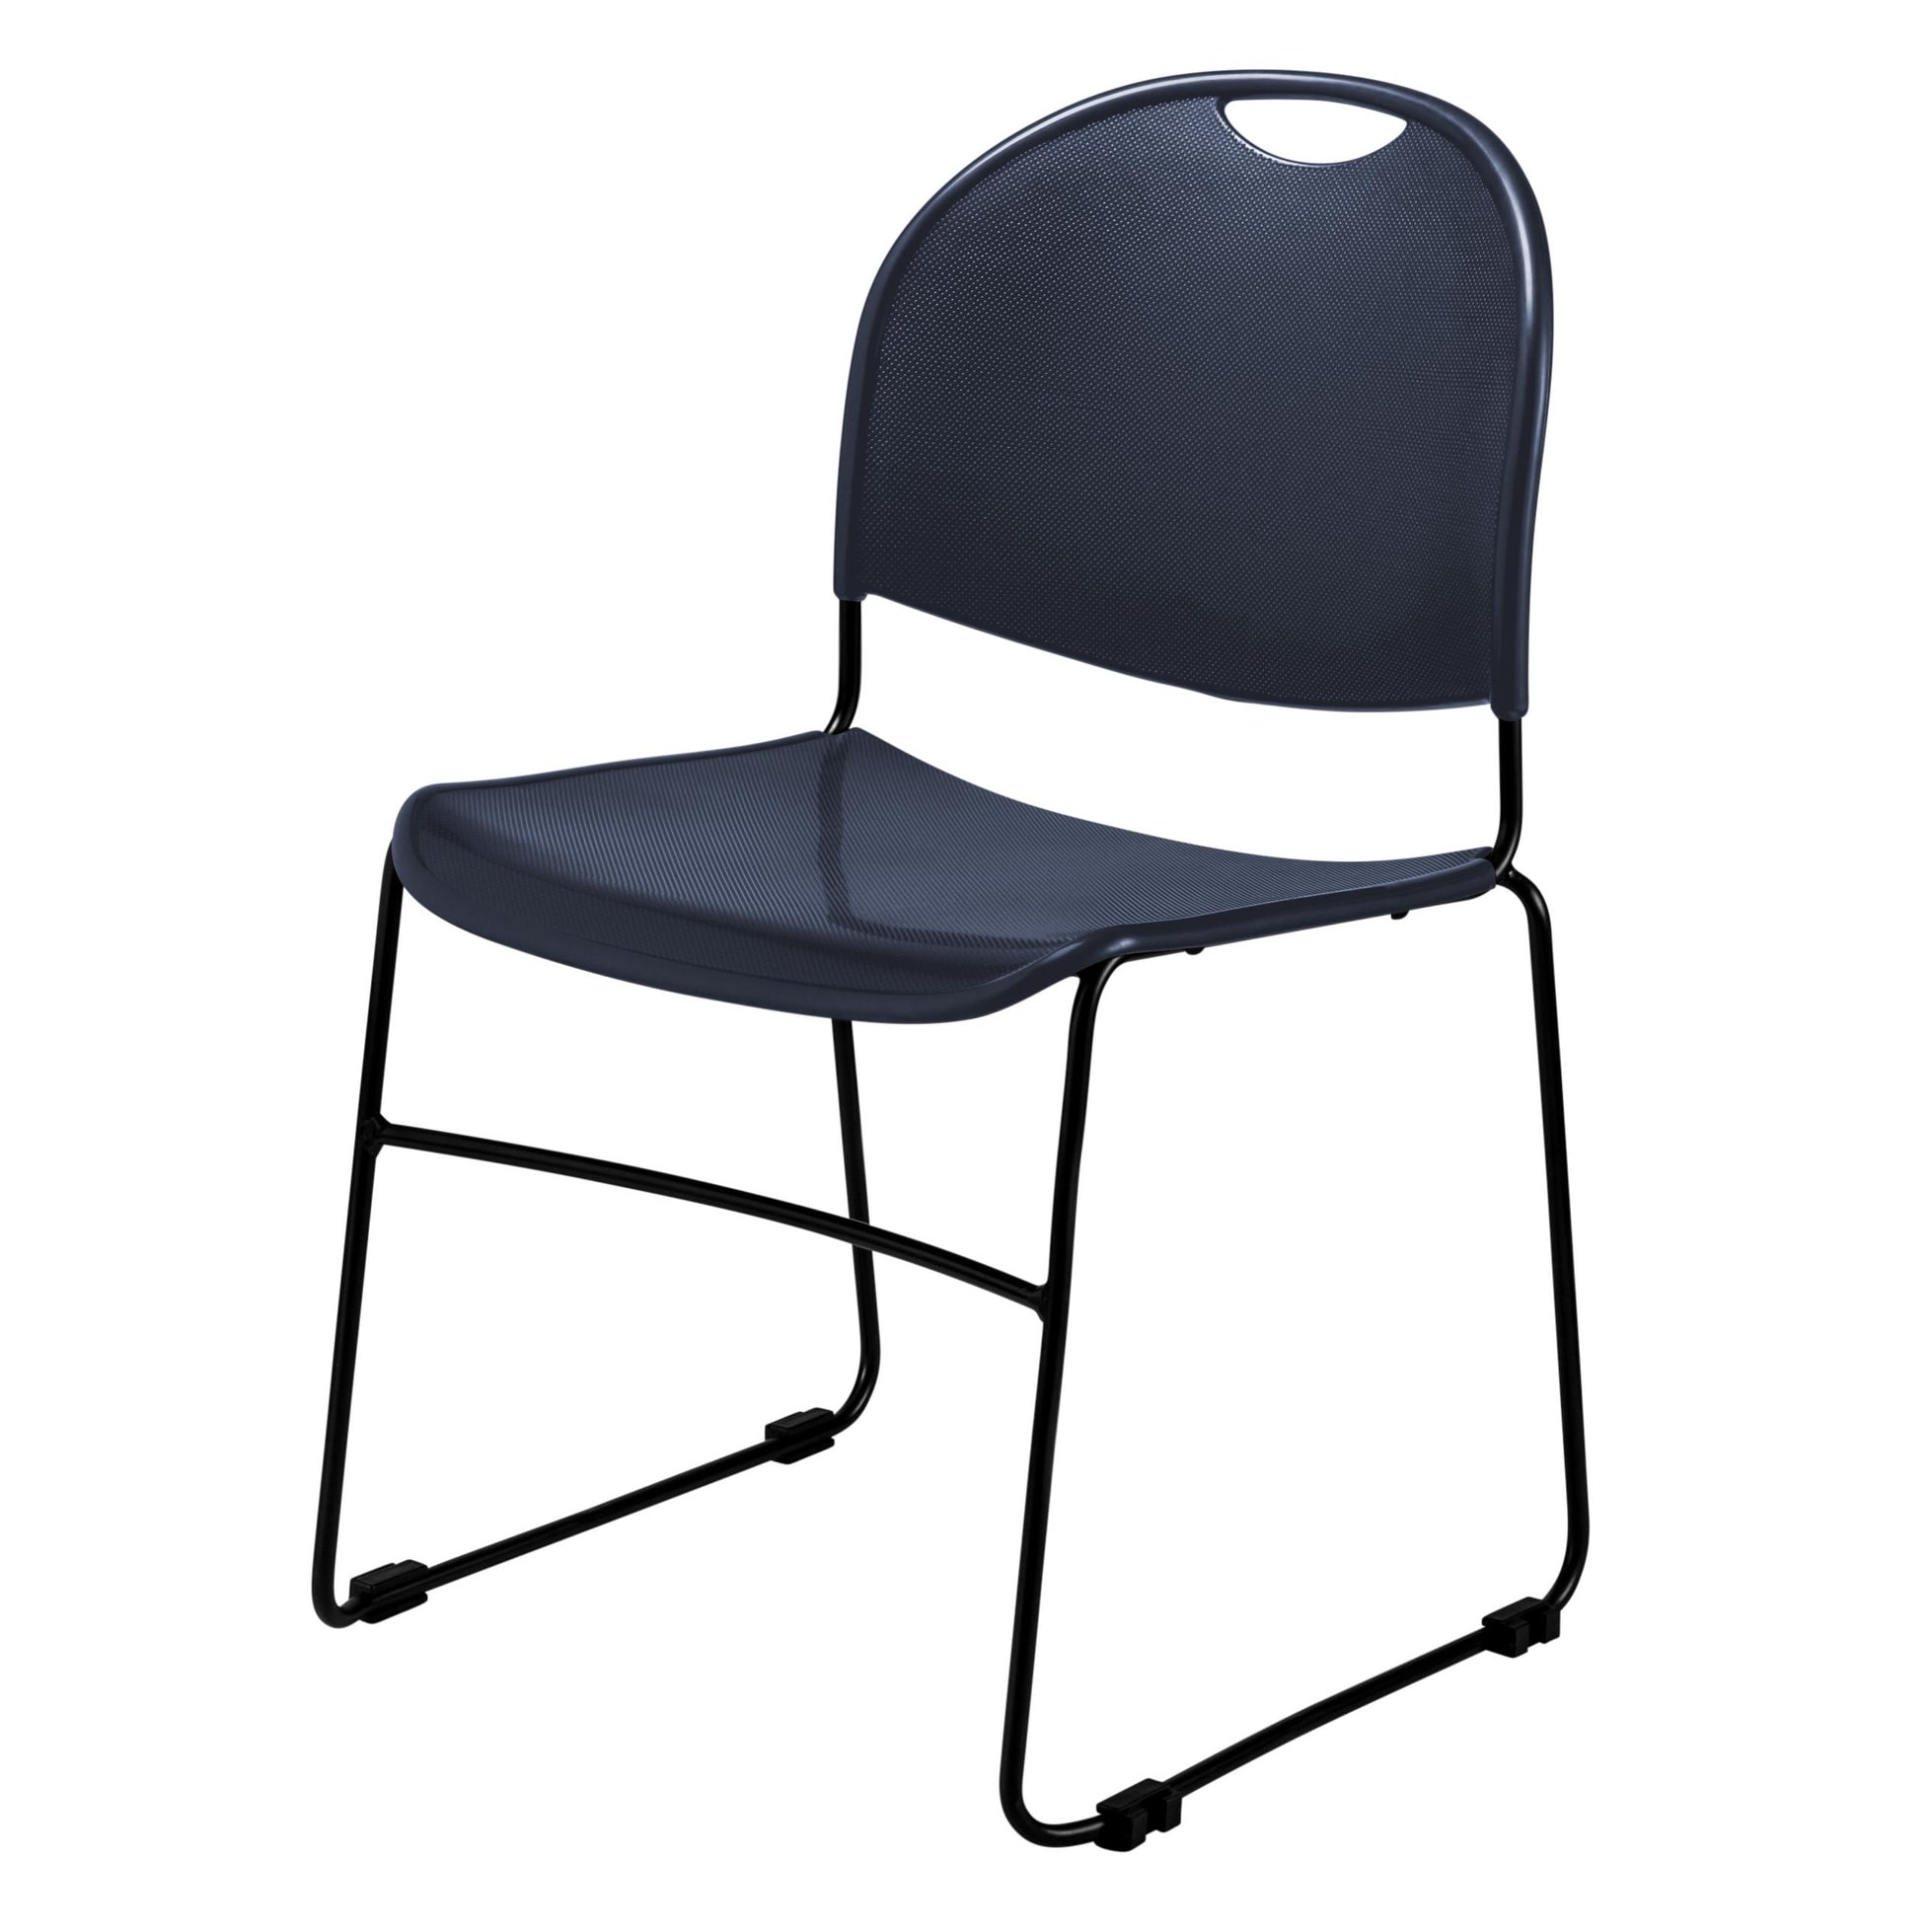 (12 Pack) Commercialine 850 Series Multi purpose Sled Base Ultra Compact Stack Chair